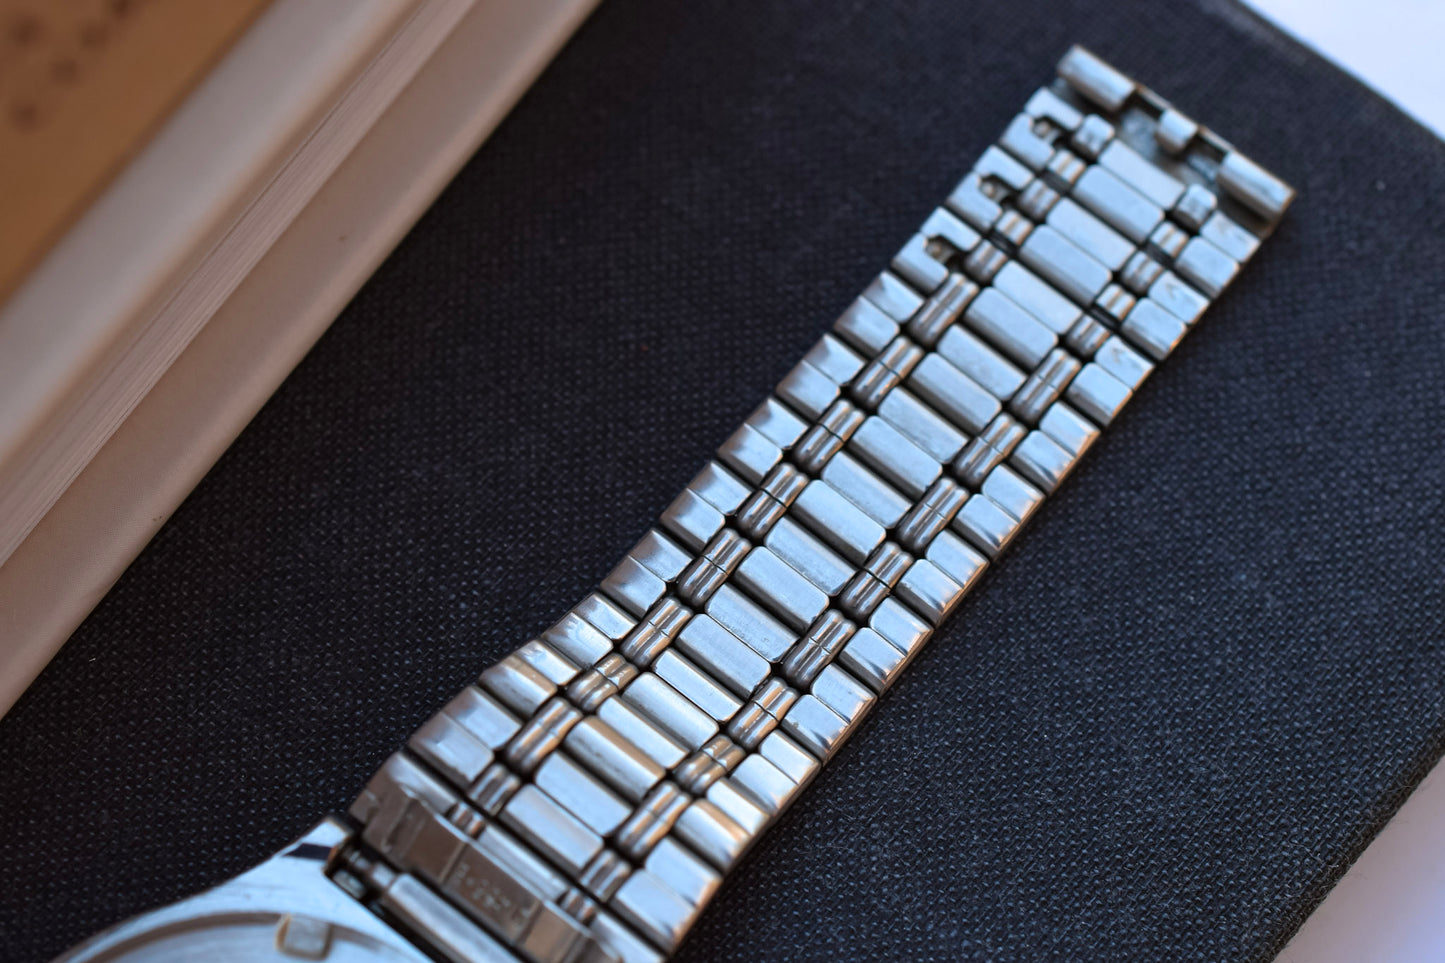 1997 Seiko Two Toned SQ Date Watch